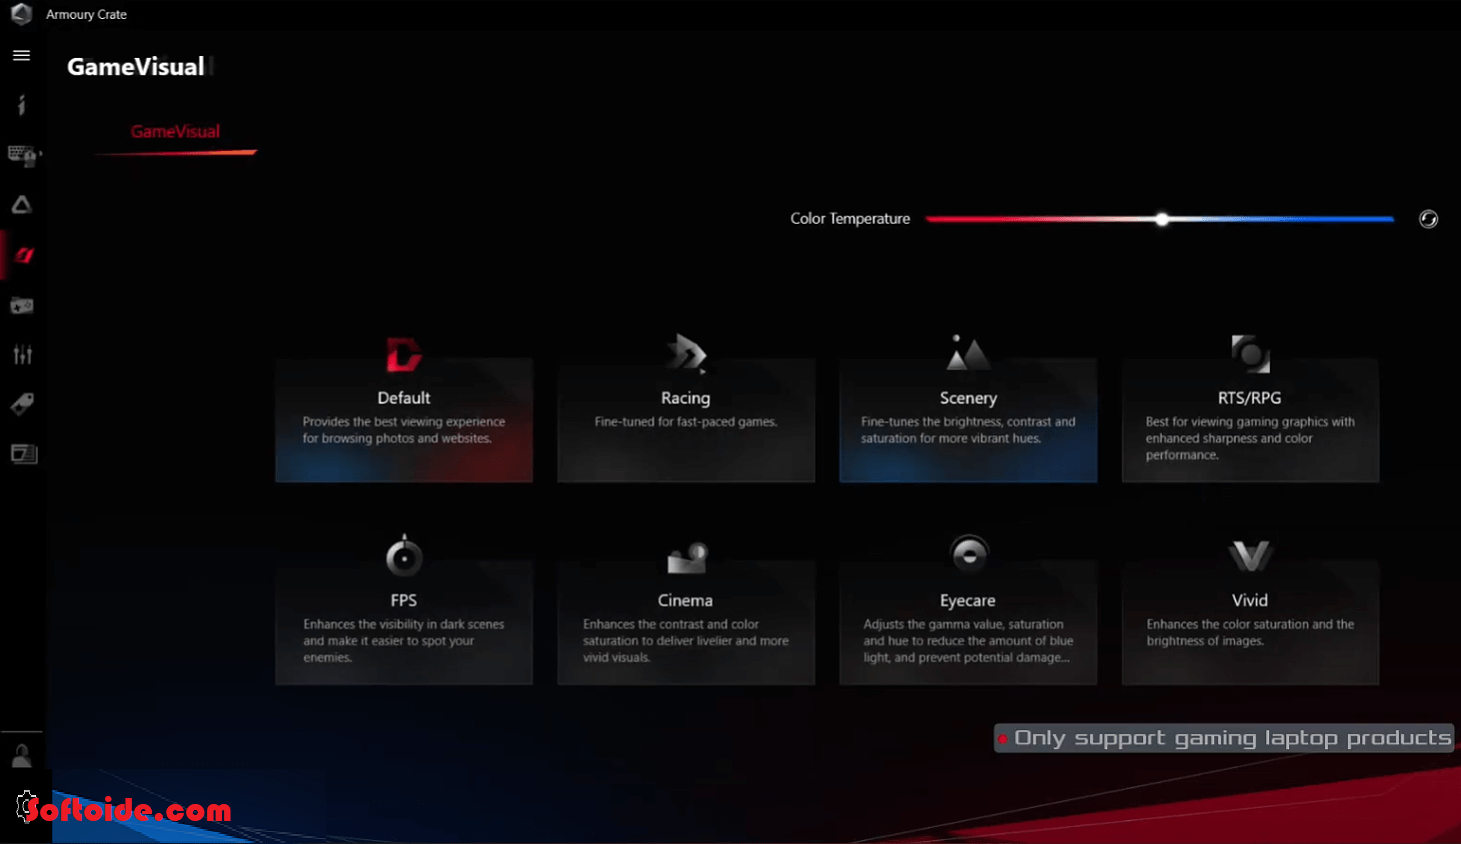 armoury-crate-connect-configure-and-control-a-plethora-of-ROG-gaming-products-screenshot-05